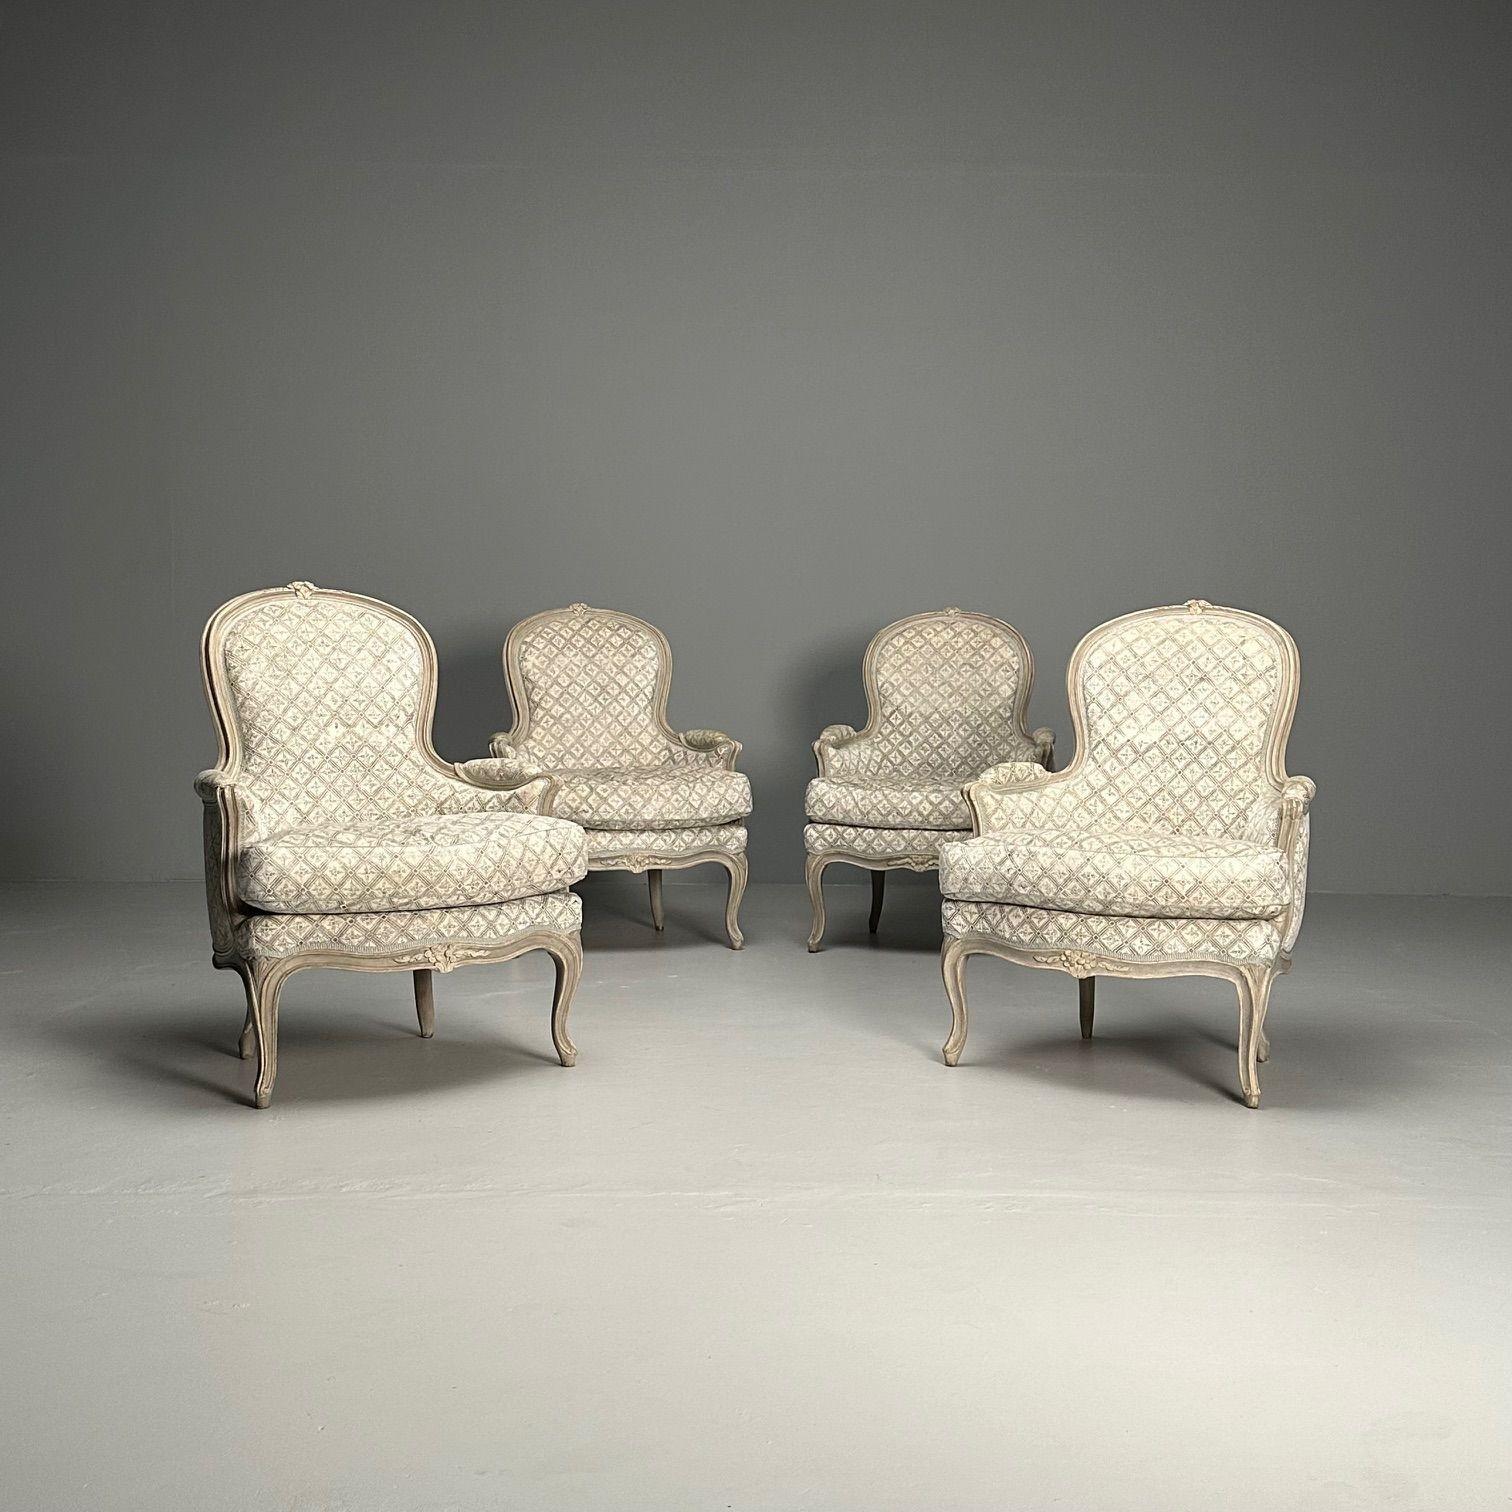 Louis XV Style, Arm / Bergere Chairs, Grey Painted Wood, Fabric, France

Set of Four Arm Chairs, two earlier 1890s and two later in a fine upholstery. These chairs commissioned from a Greenwich CT gentleman have graced a fine home for many years.